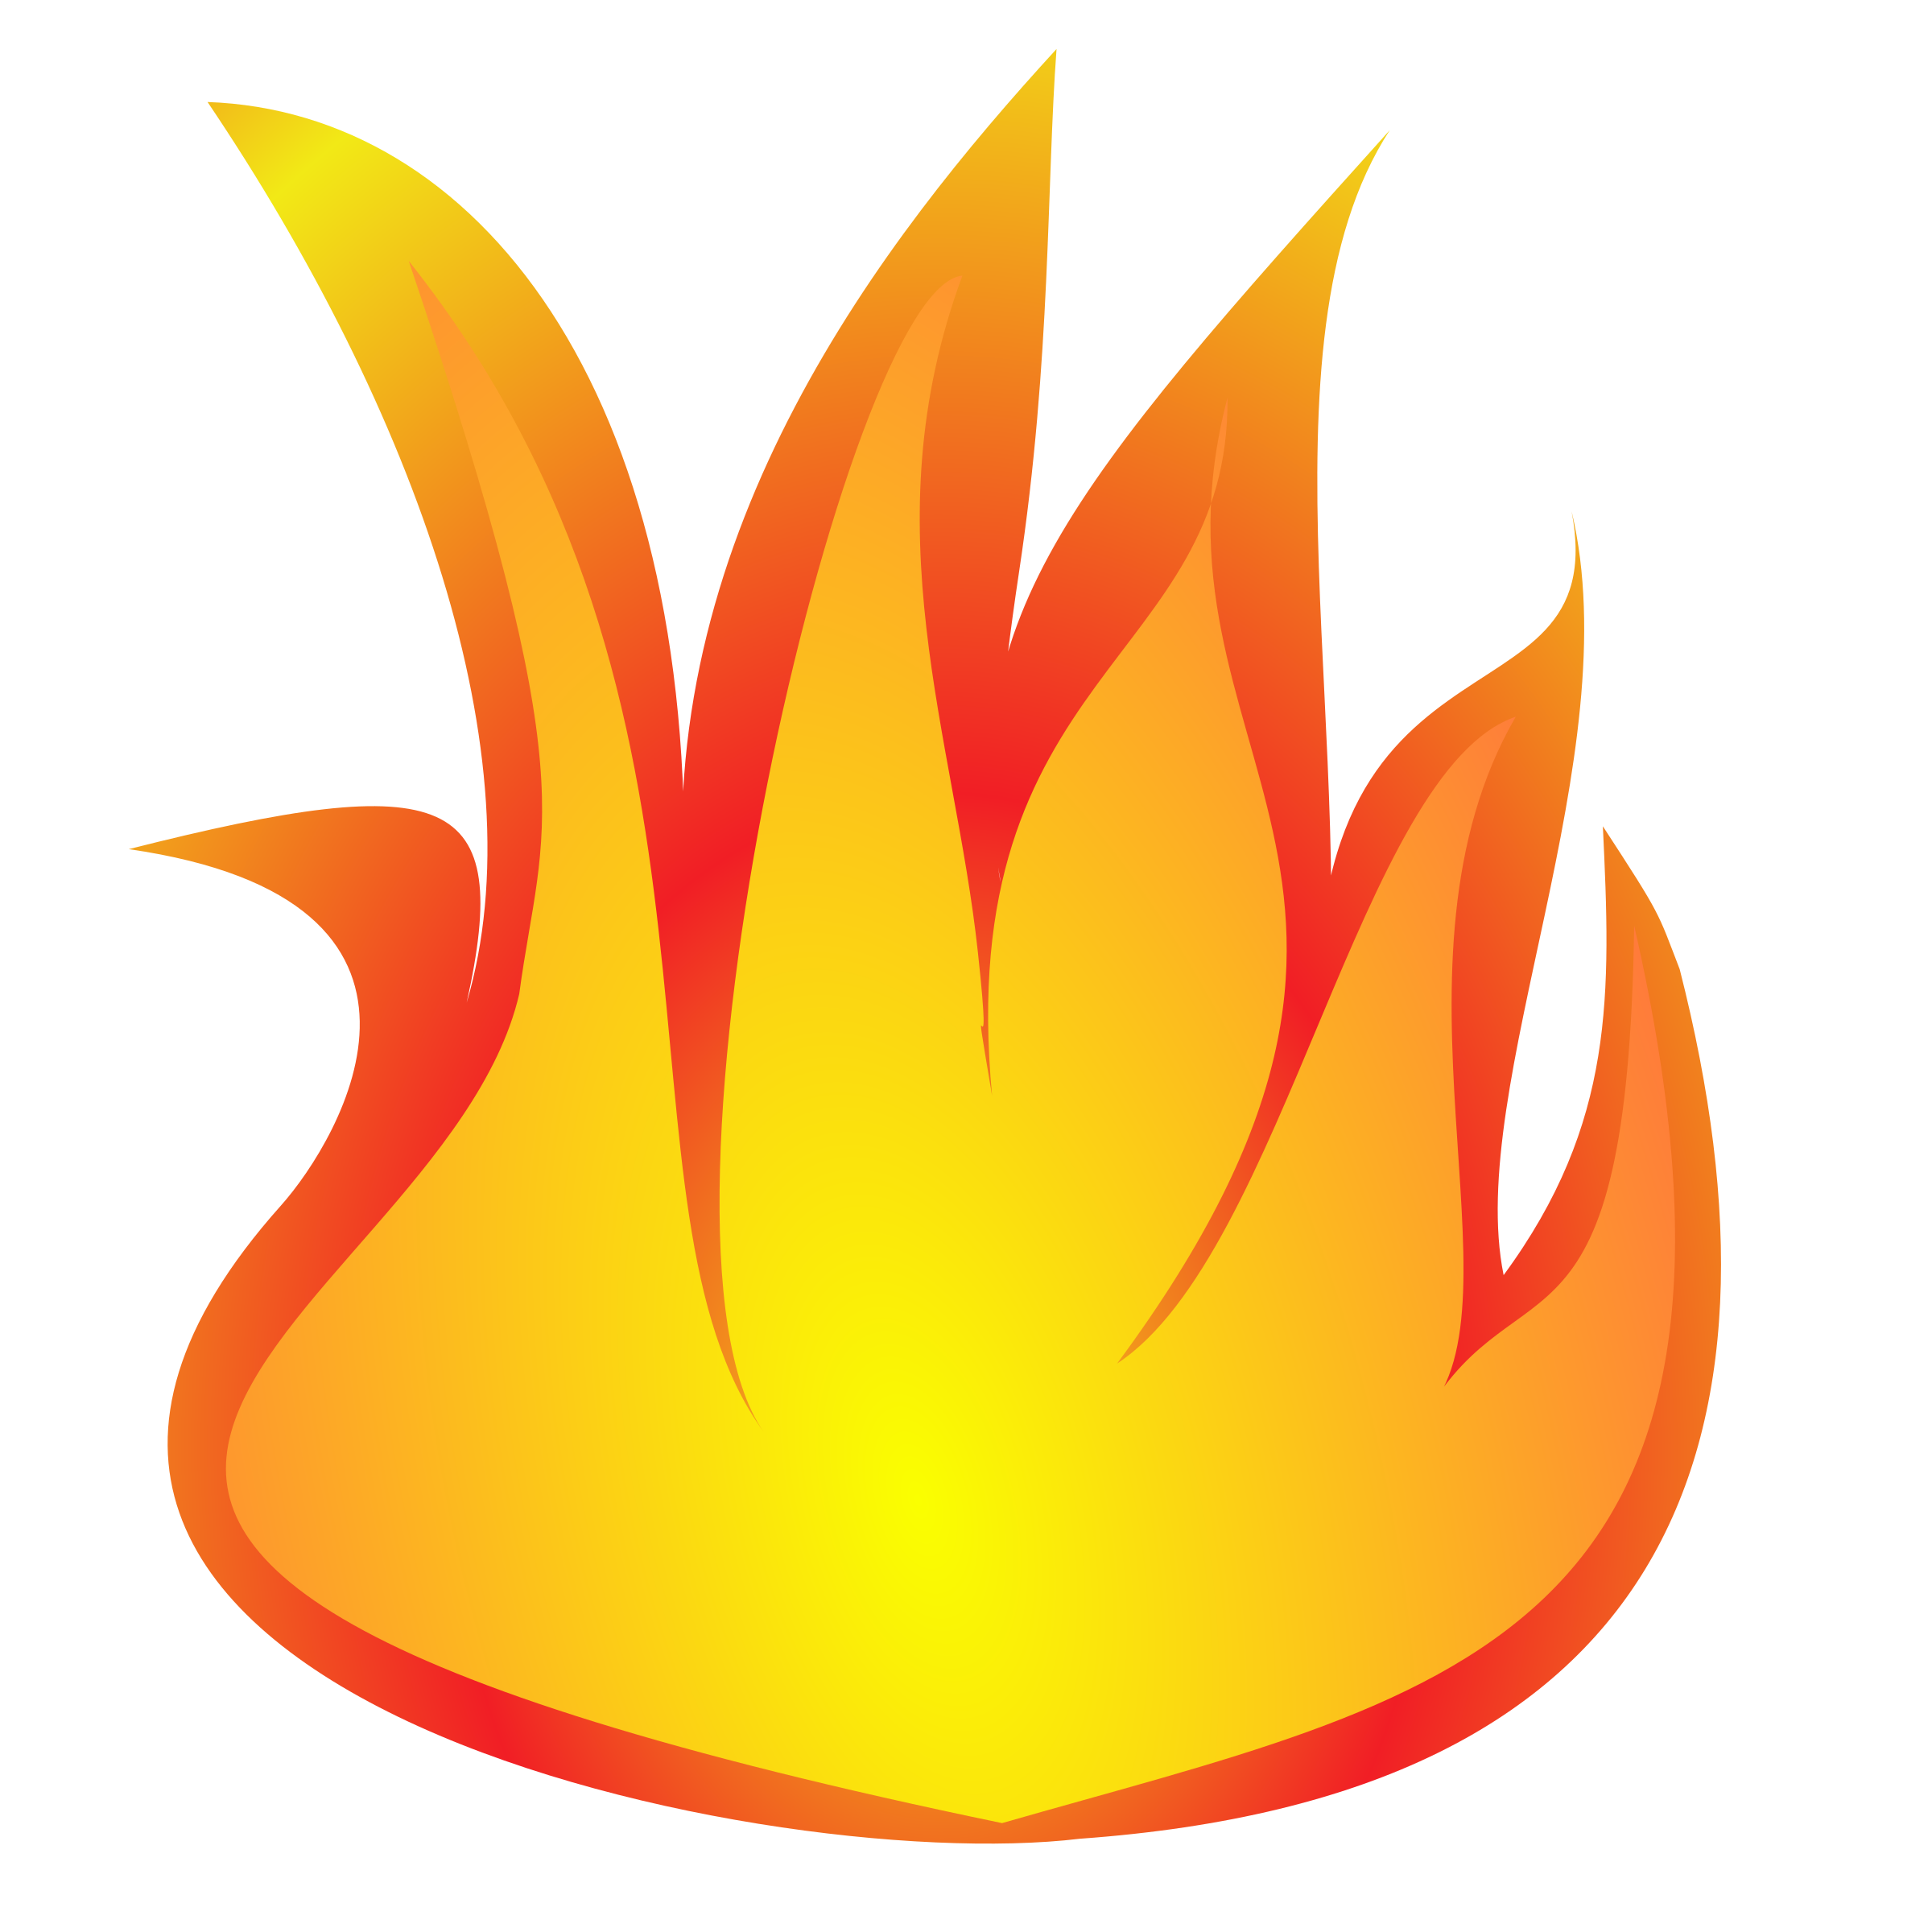 Flame fire clipart 3 image cliparting